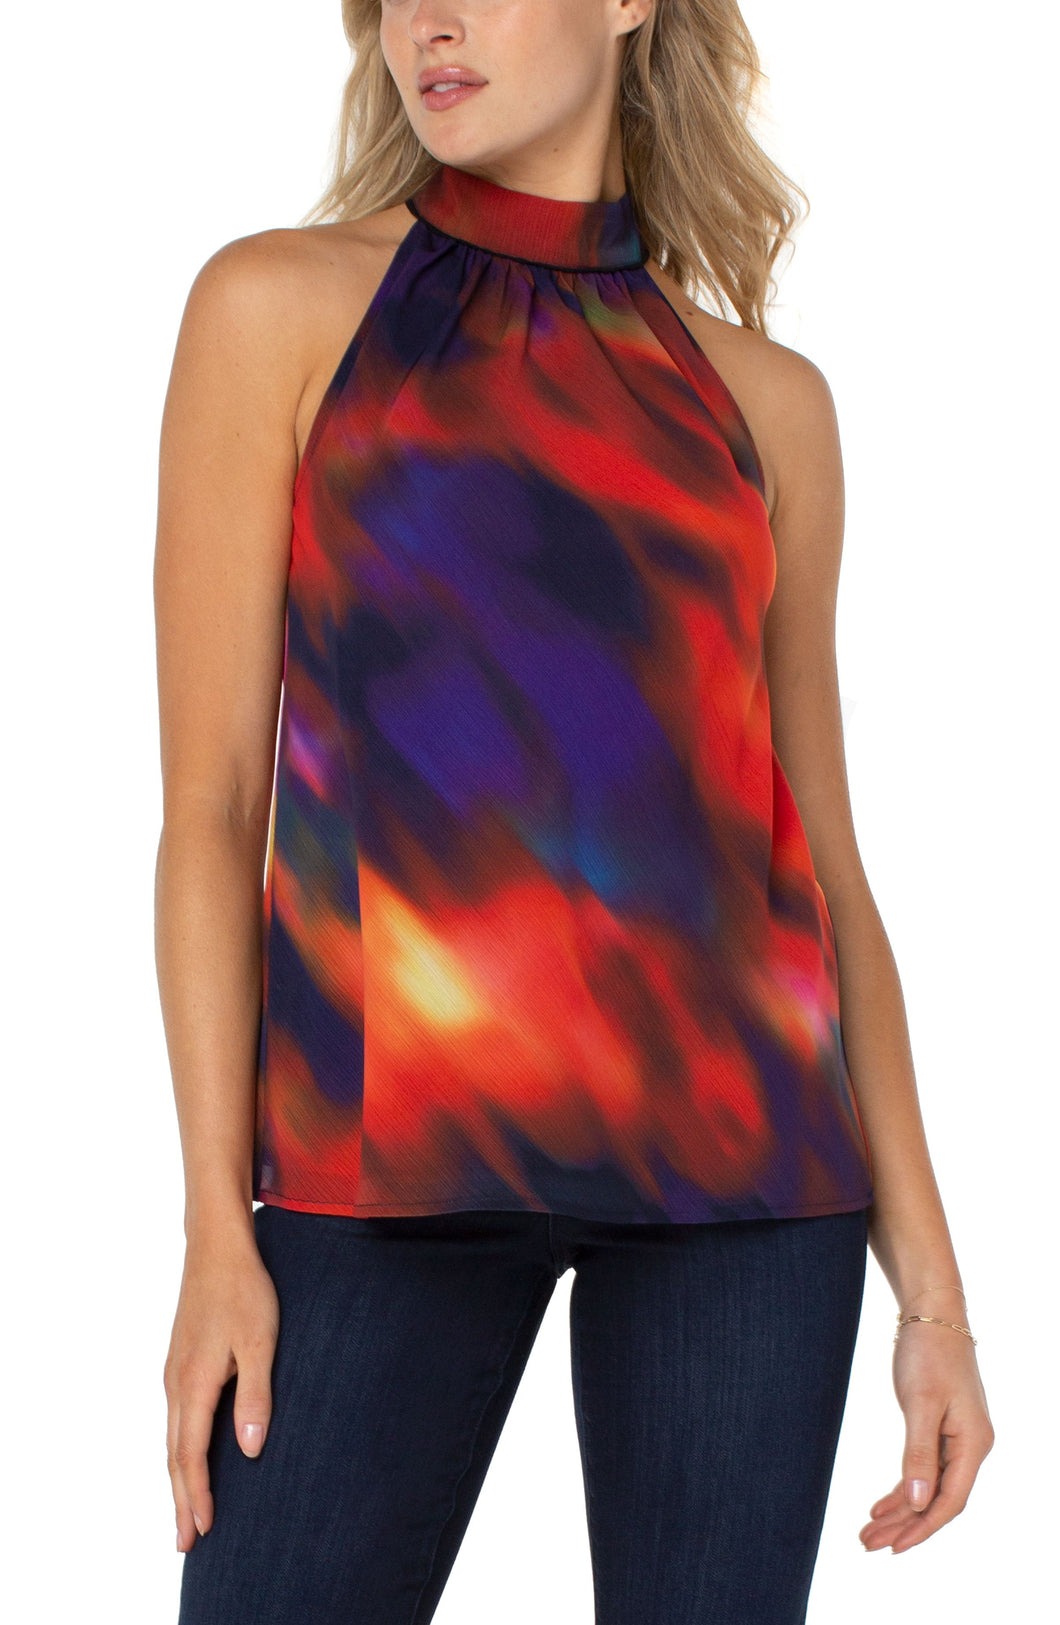 Showcasing brilliant color in an unique northern lights print, this top is perfect for brunch or special occasions. Pair it with denim or a trouser. This amazing style will is a definite attention grabber!  Colors- Splashes of red, purple/blue, yellow. Mock neck/halter. Button closure. Double layer.